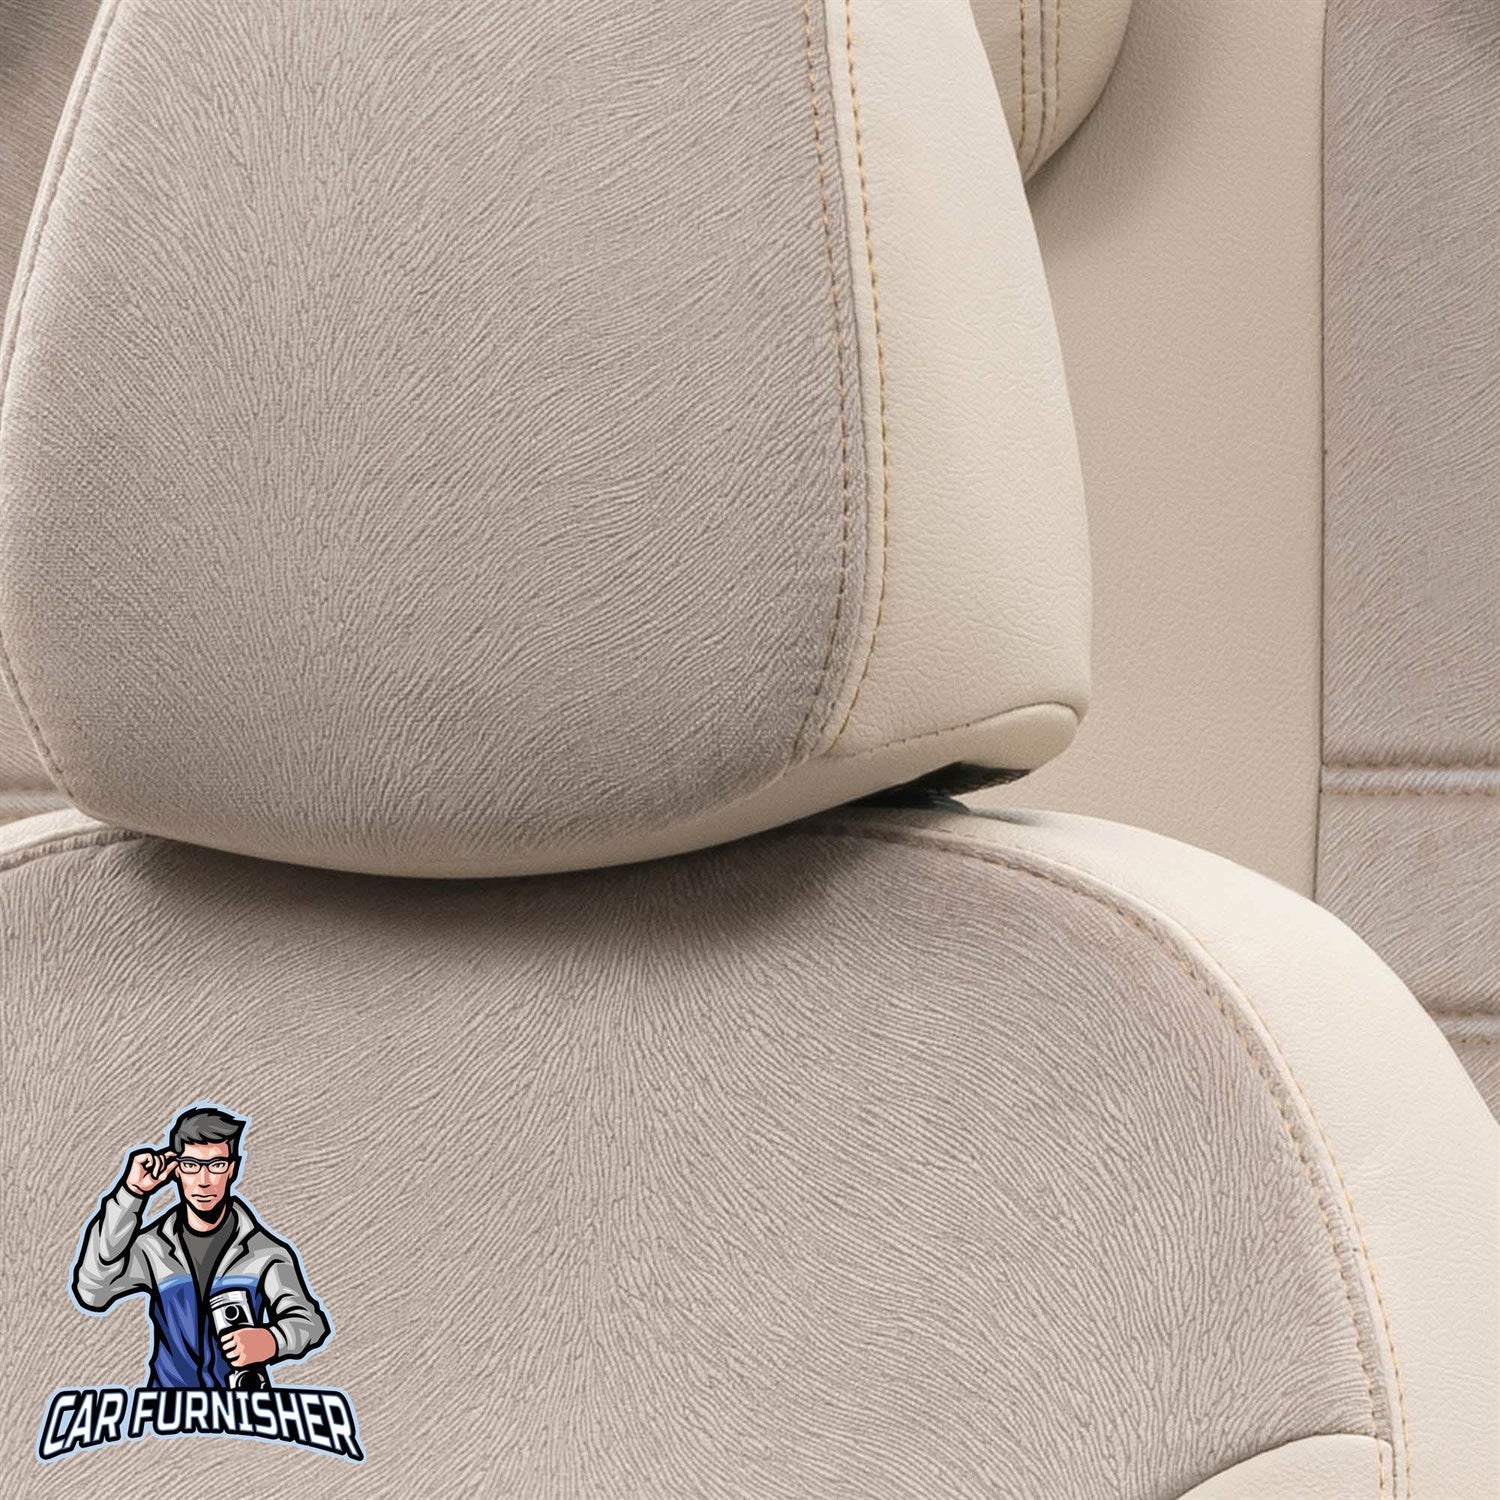 Landrover Freelander Car Seat Covers 1998-2012 London Design Beige Leather & Foal Feather